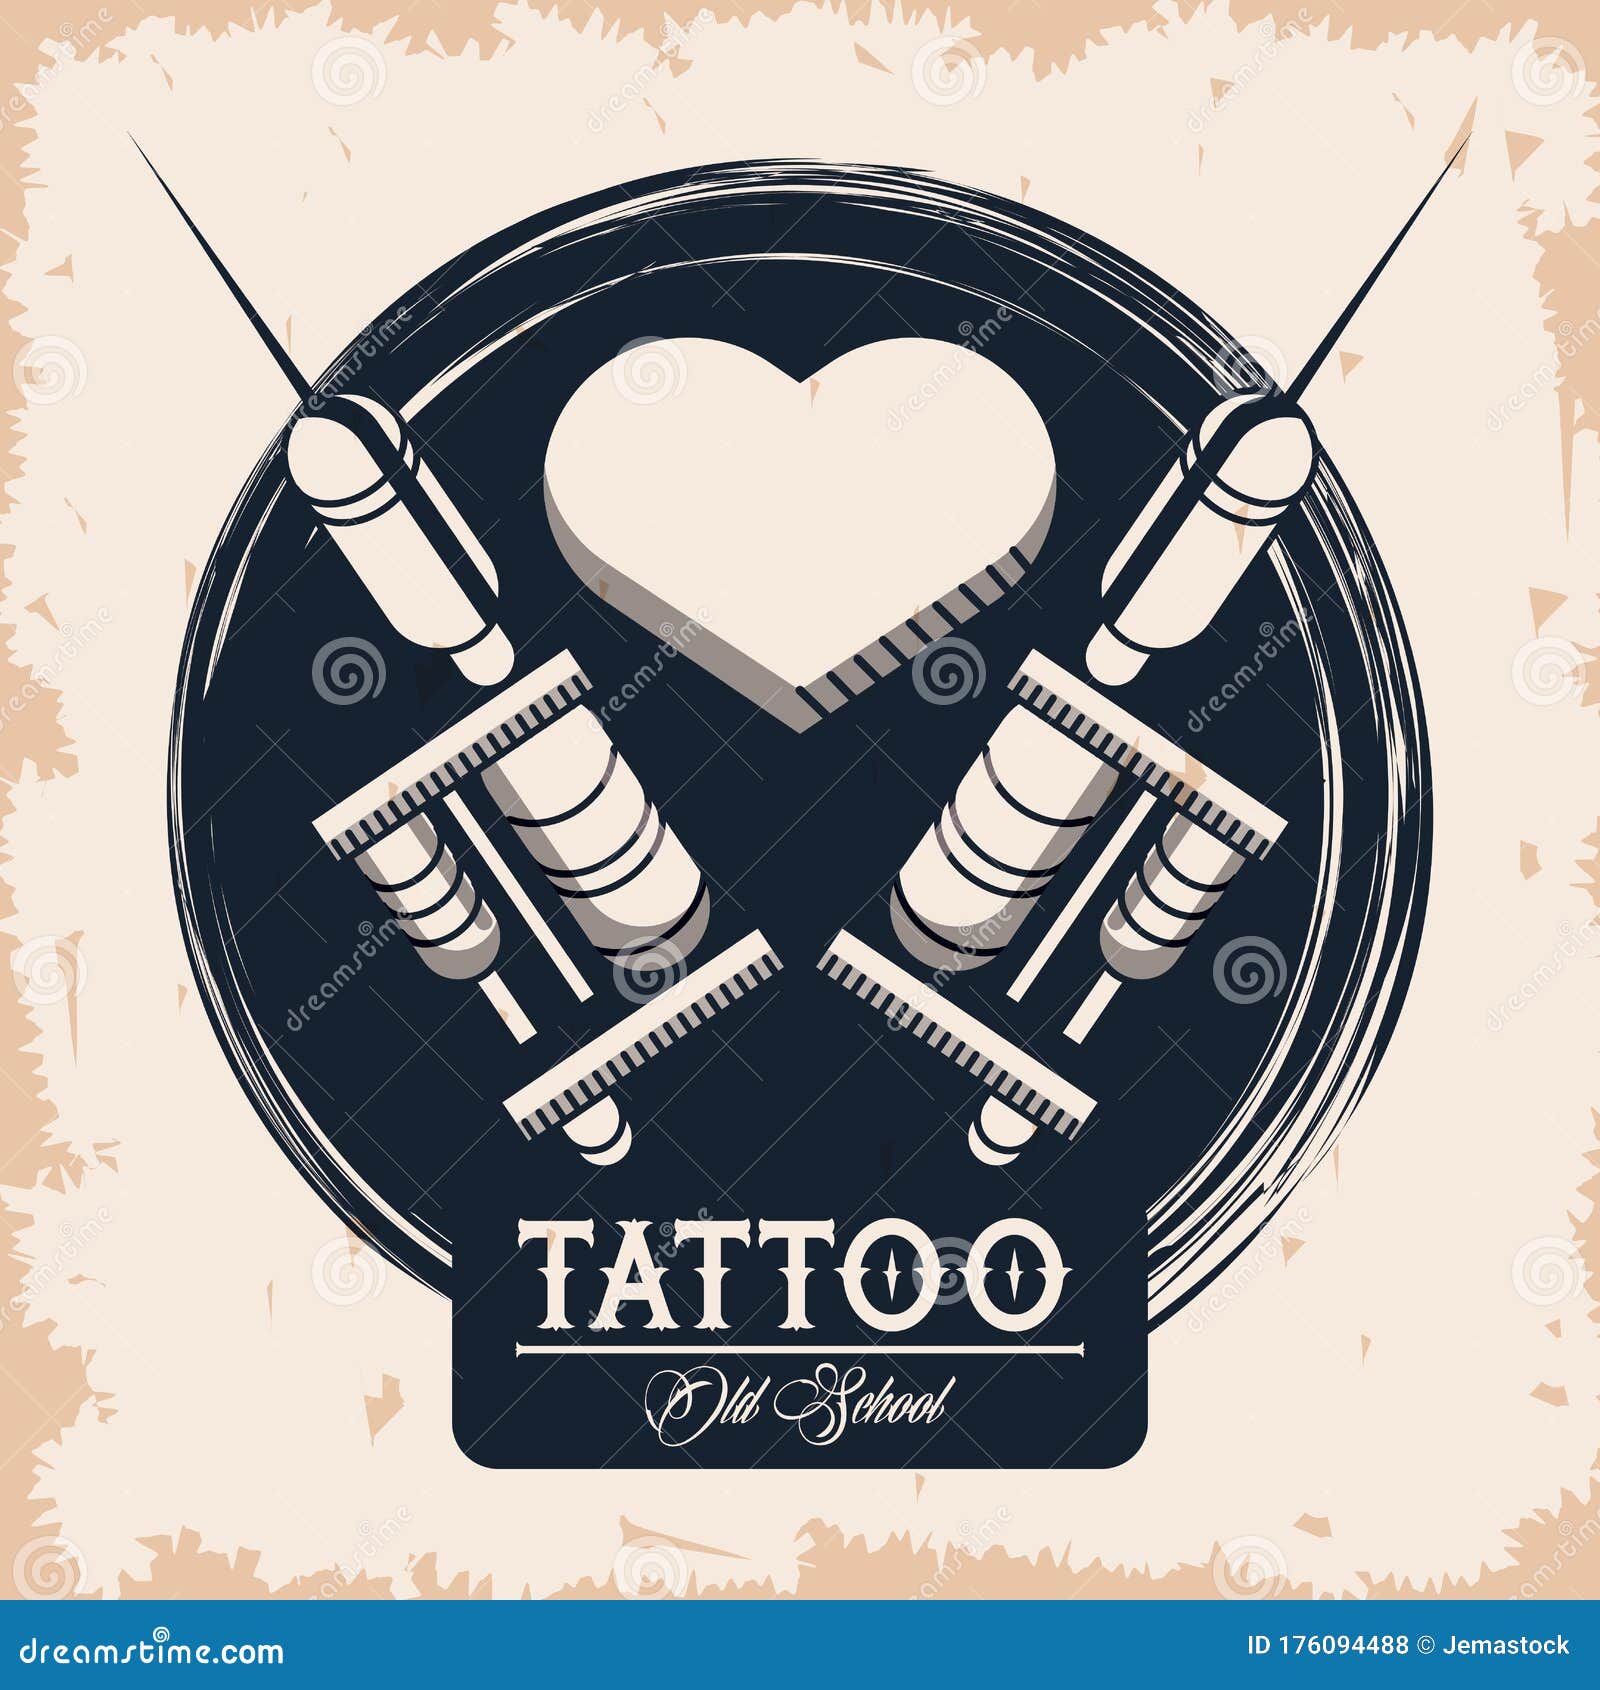 Tattoo Studio Machines with Heart Image Artistic Stock Vector - Illustration of sign, decoration: 176094488